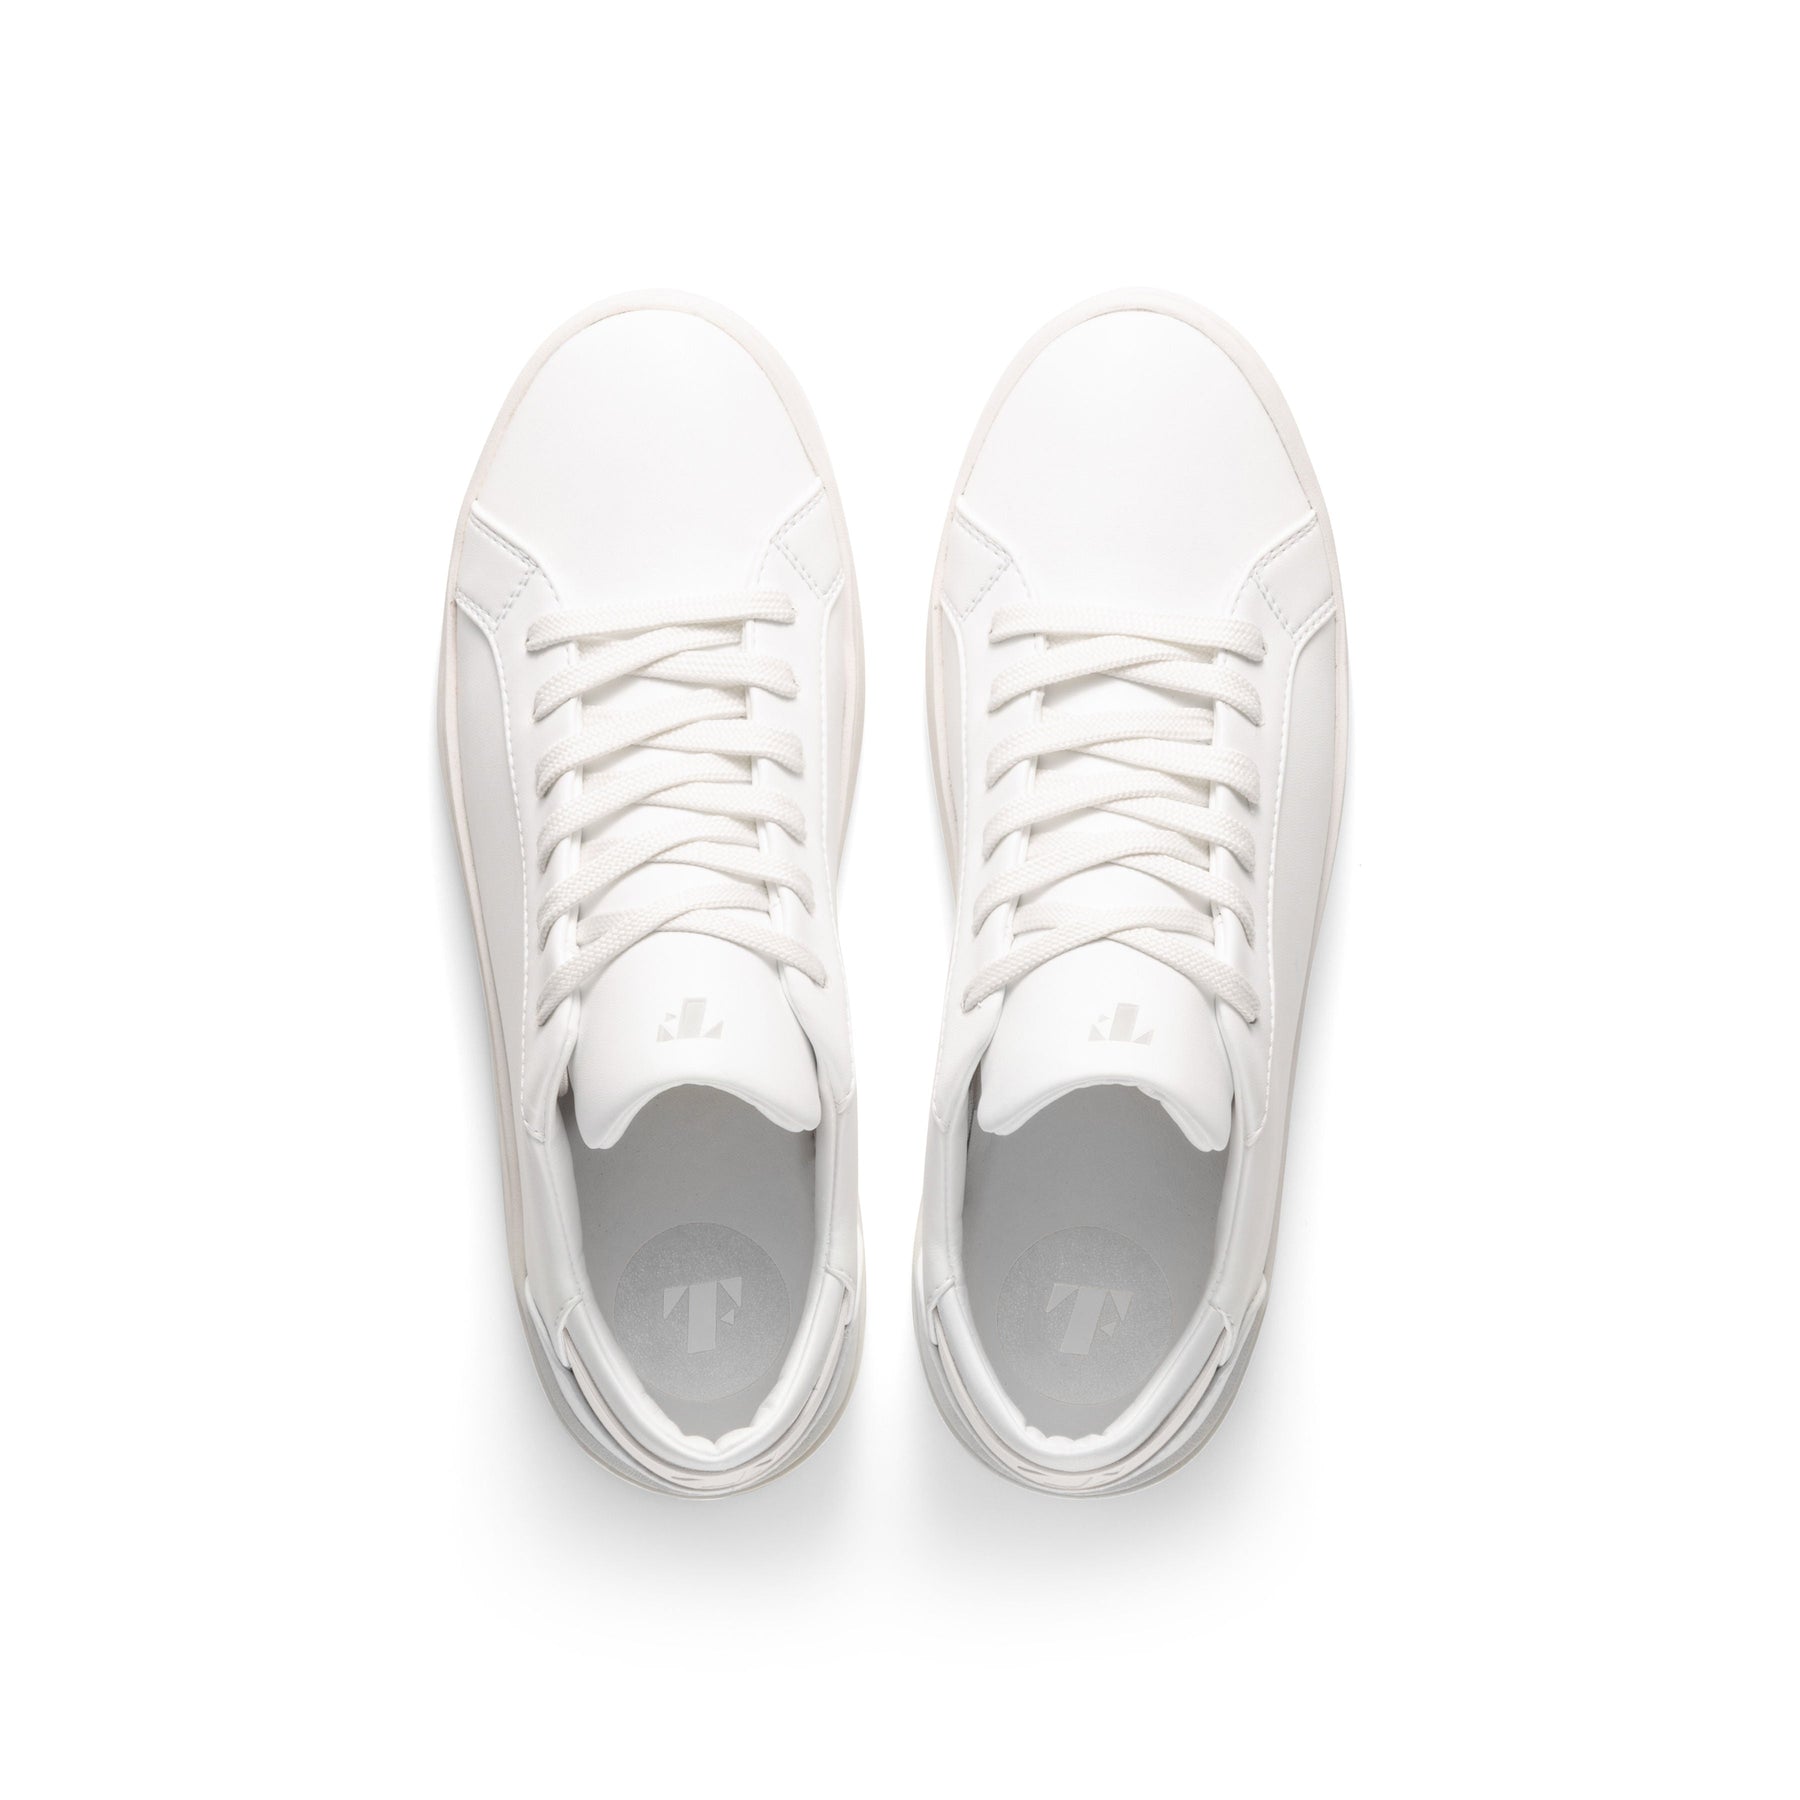 top view of classic white sneakers with vegan leather